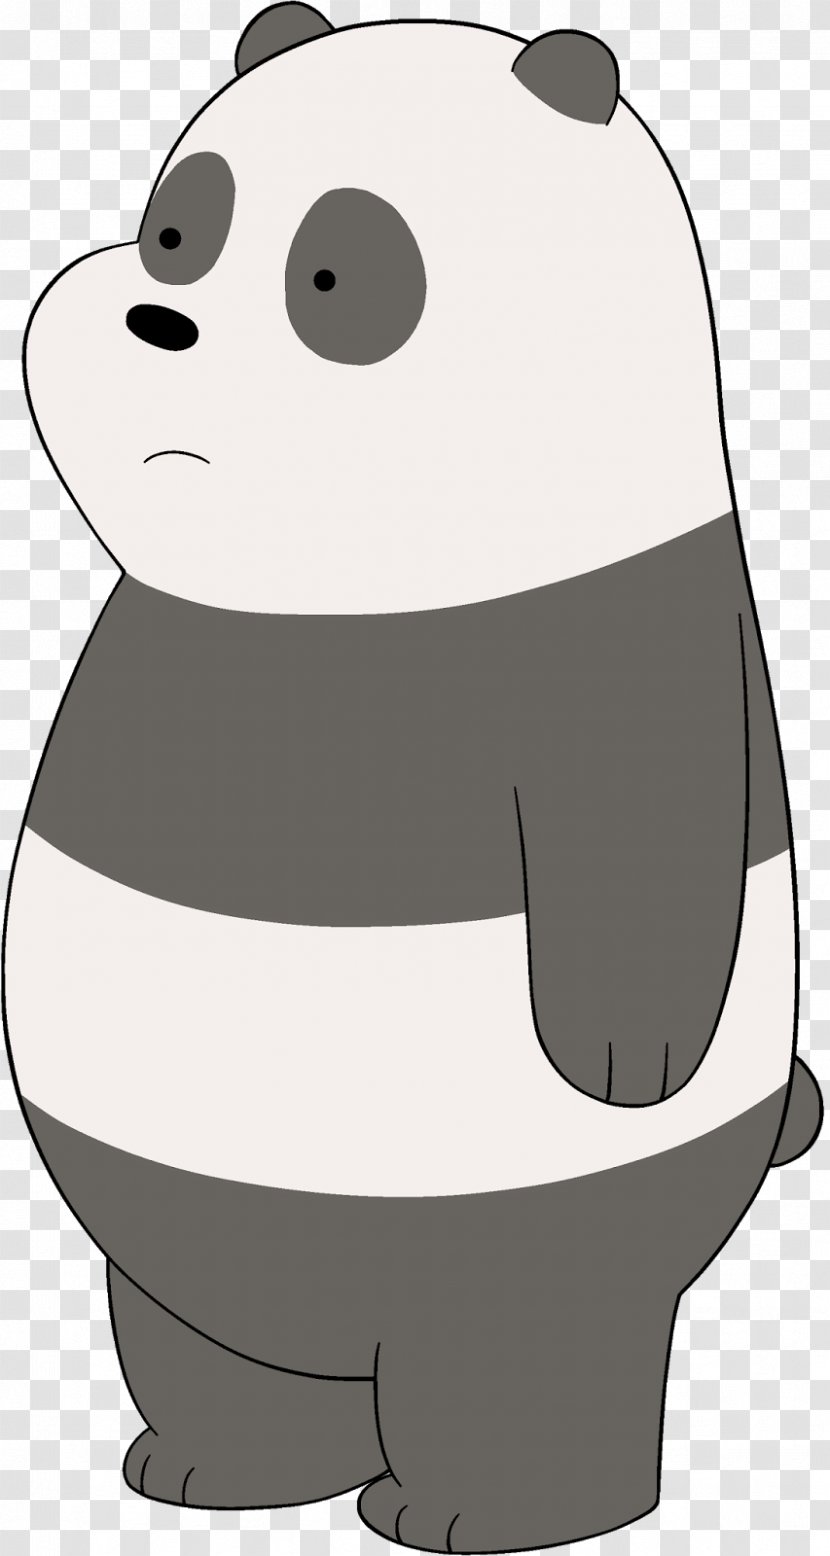 Giant Panda Ice Bear Grizzly - We Bare Bears Transparent PNG